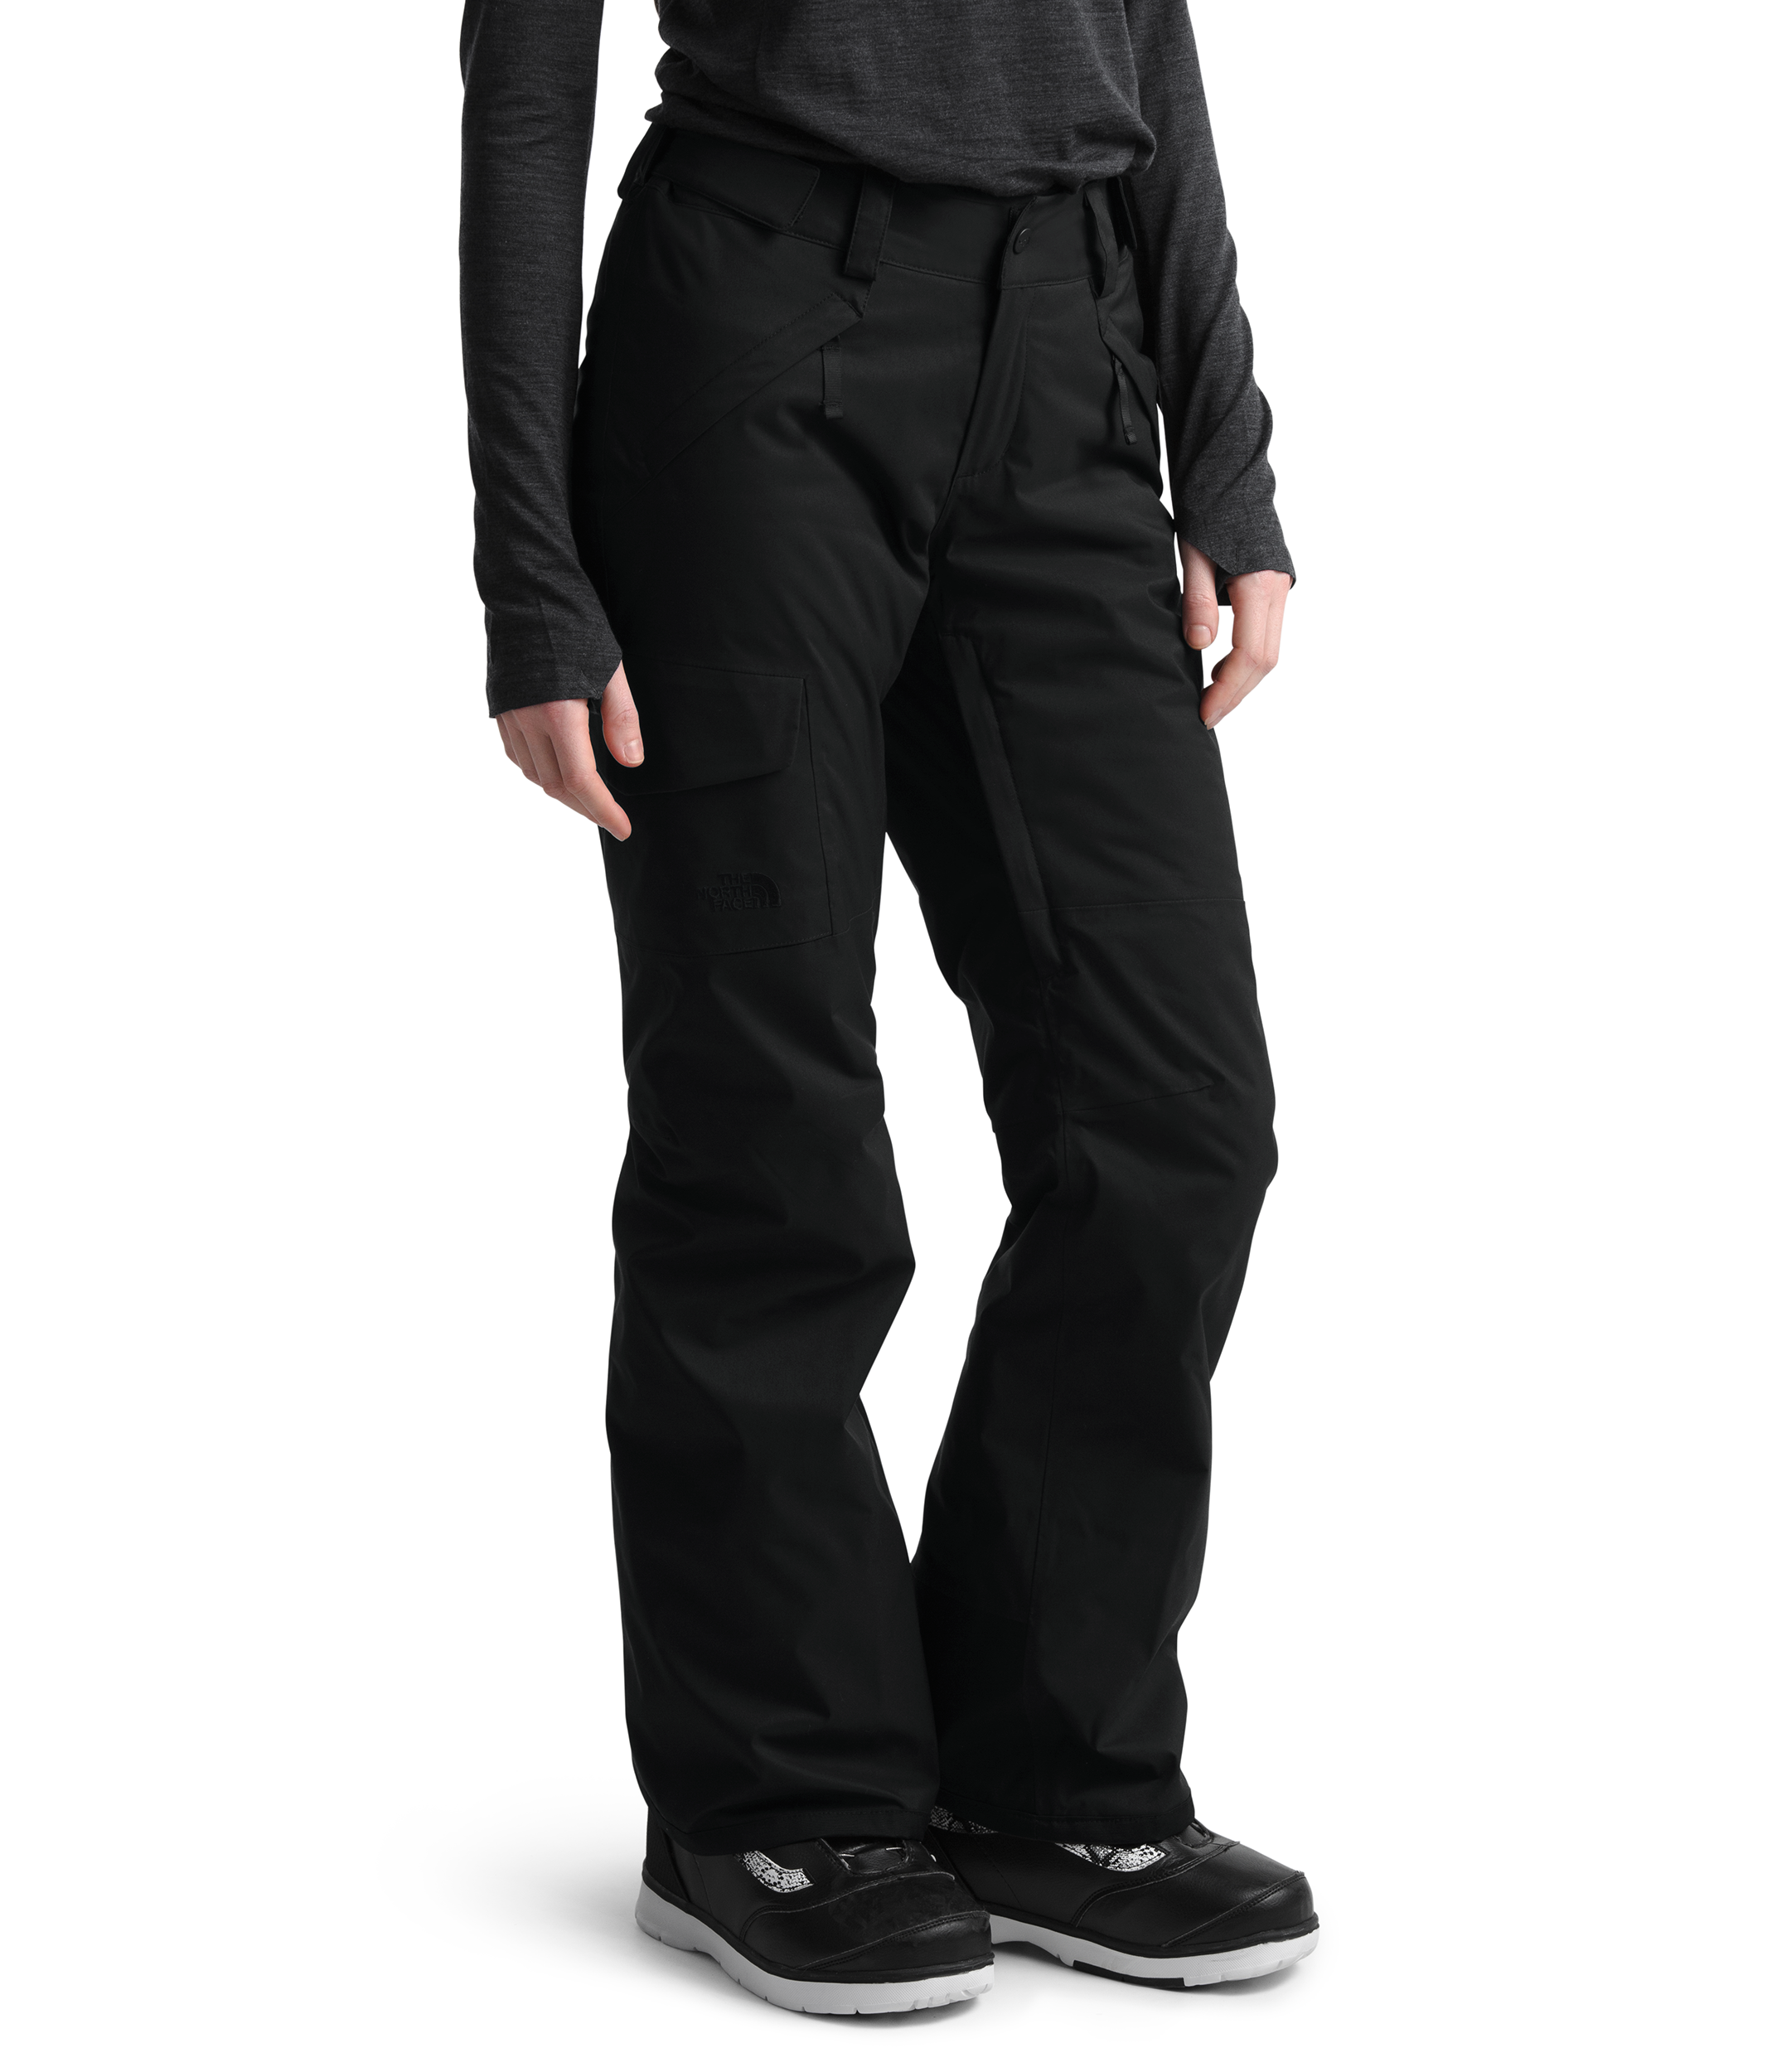 Women's Freedom Insulated Pants, The North Face